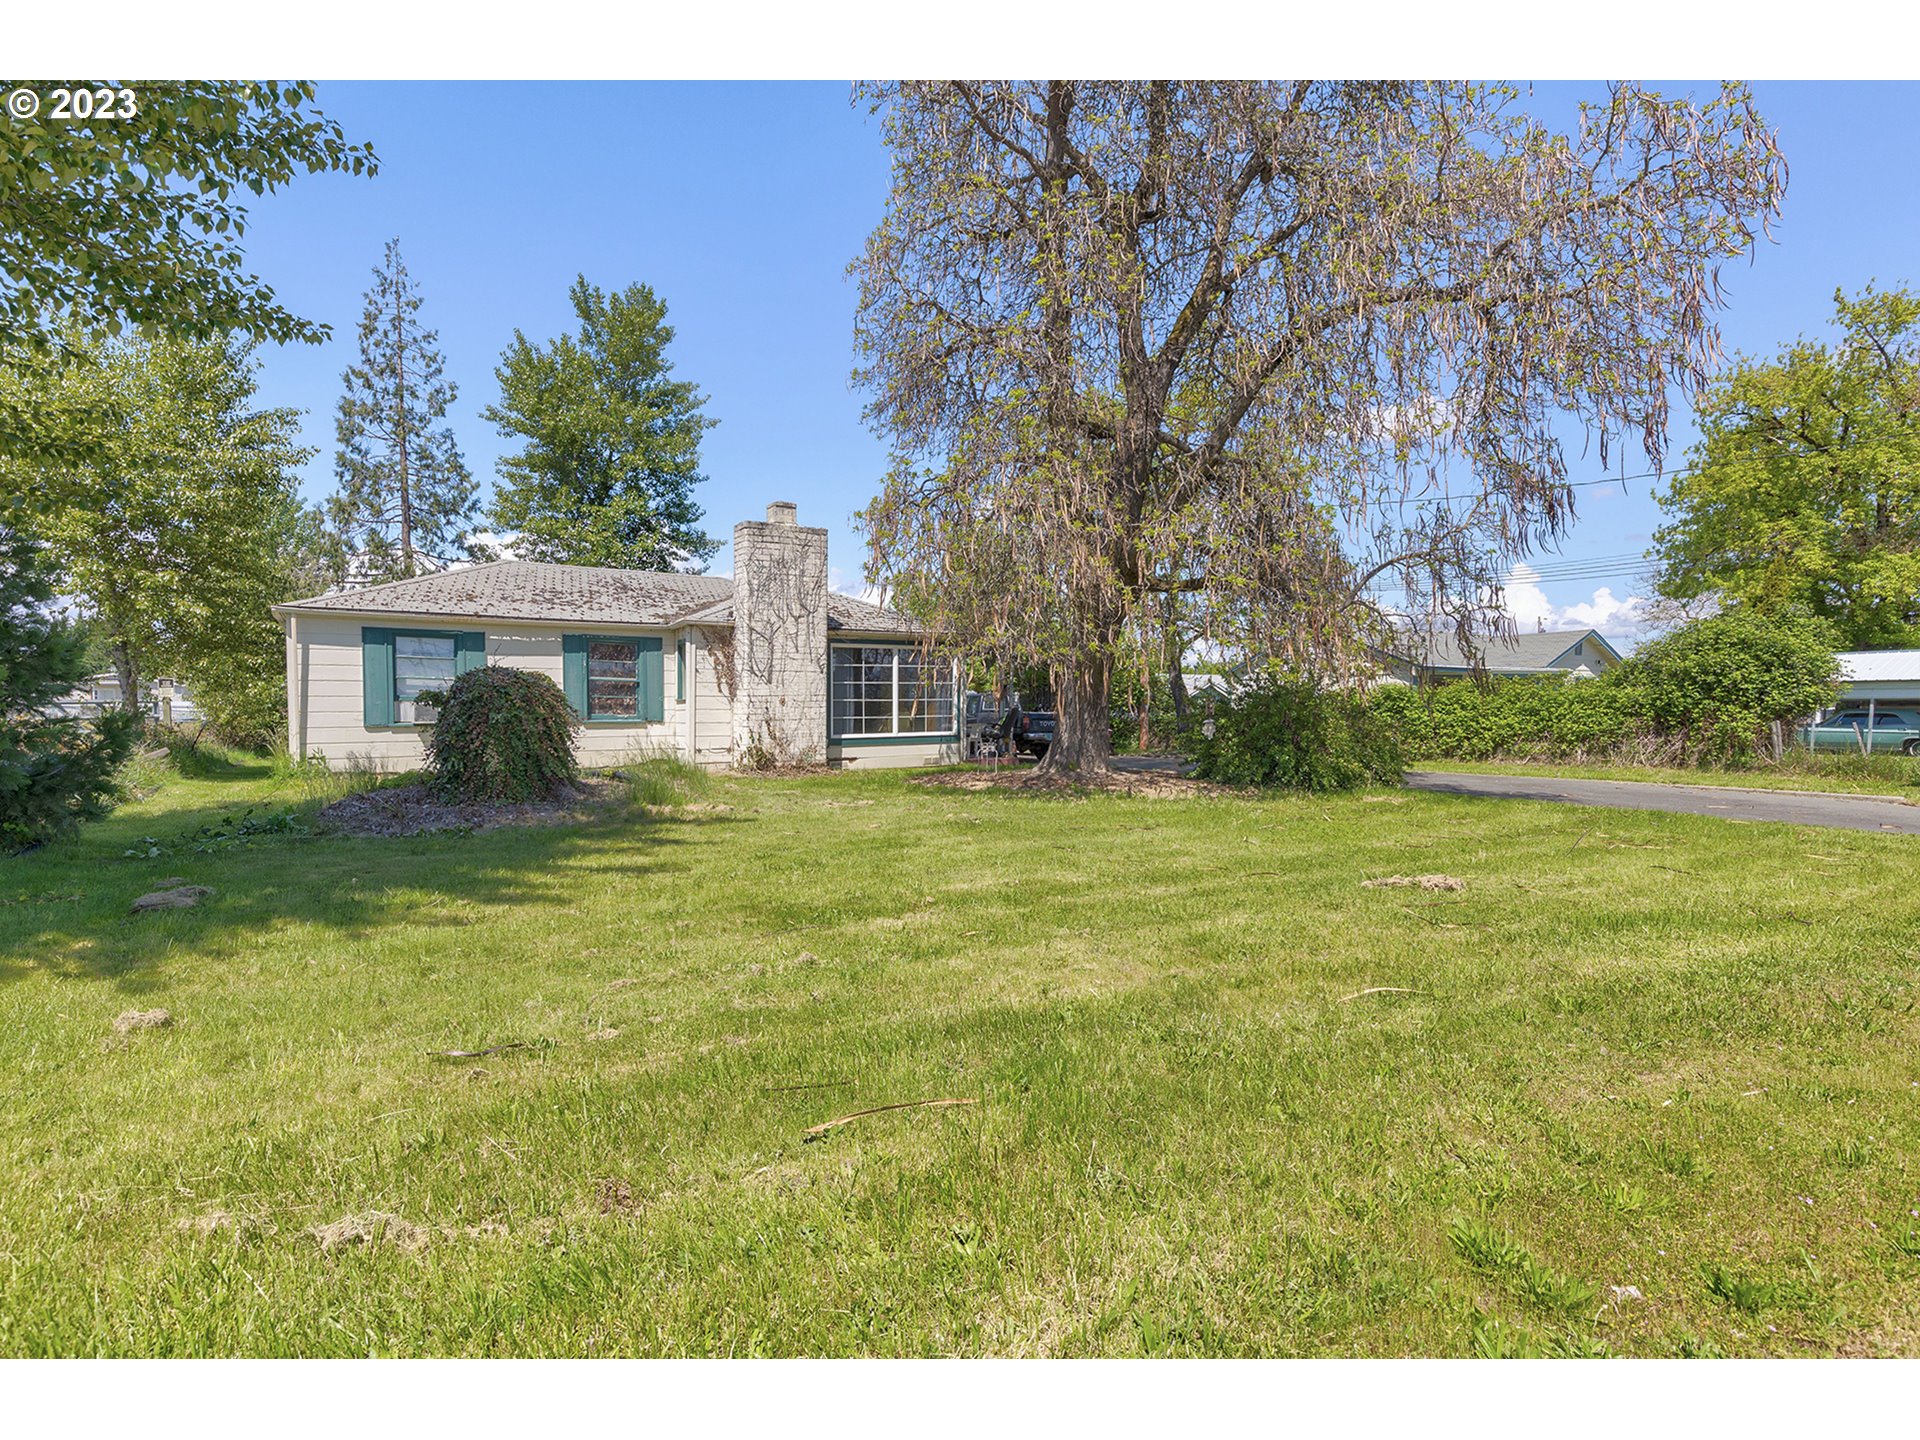 1694 DOWELL RD, Grants Pass, OR 97527